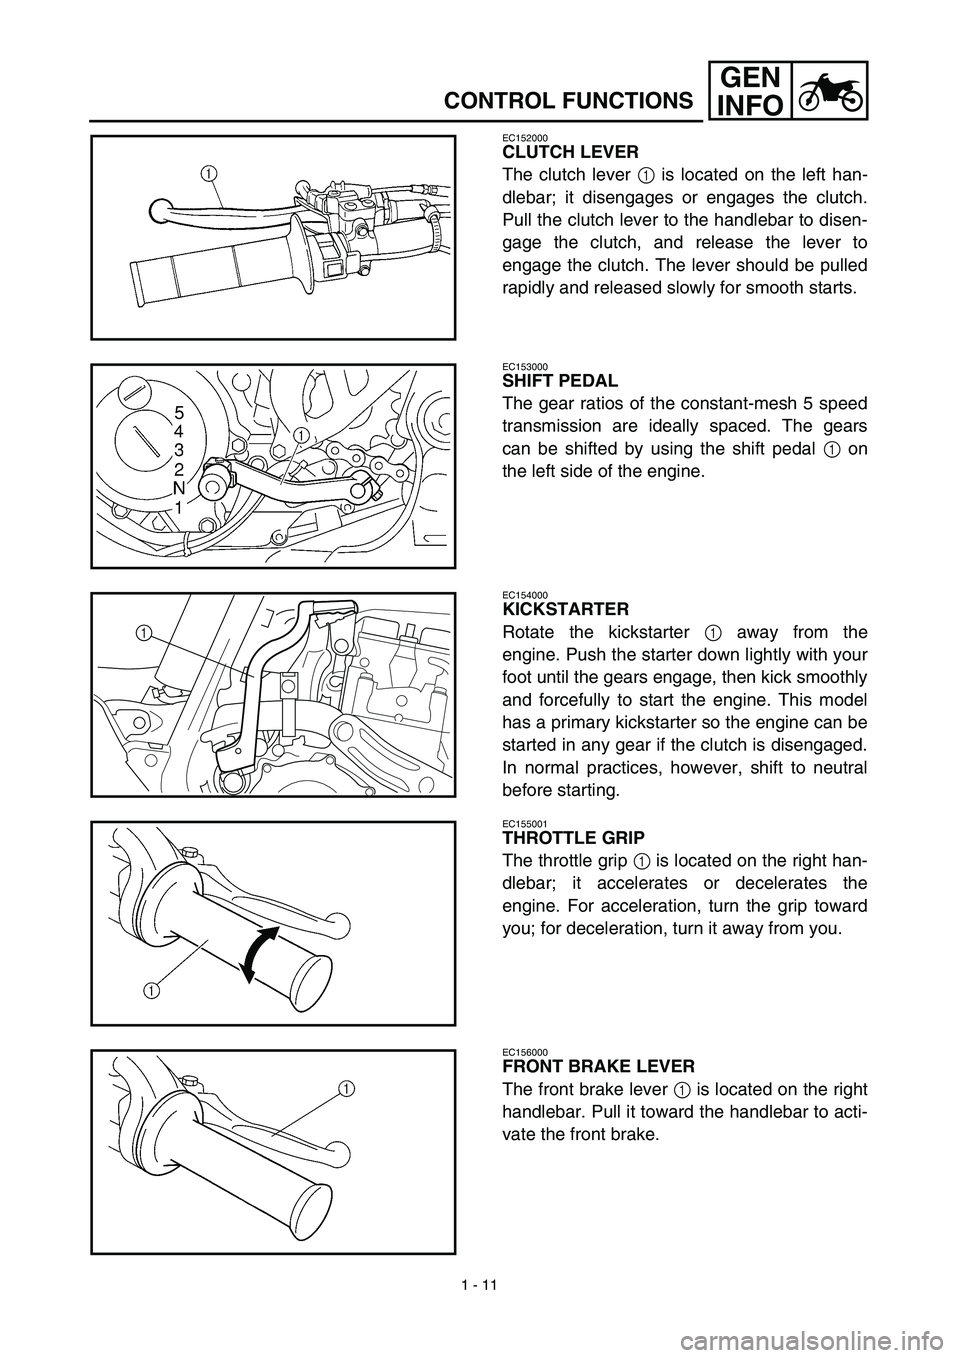 YAMAHA WR 450F 2003  Manuale de Empleo (in Spanish) 1 - 11
GEN
INFO
CONTROL FUNCTIONS
EC152000
CLUTCH LEVER
The clutch lever 1 is located on the left han-
dlebar; it disengages or engages the clutch.
Pull the clutch lever to the handlebar to disen-
gag